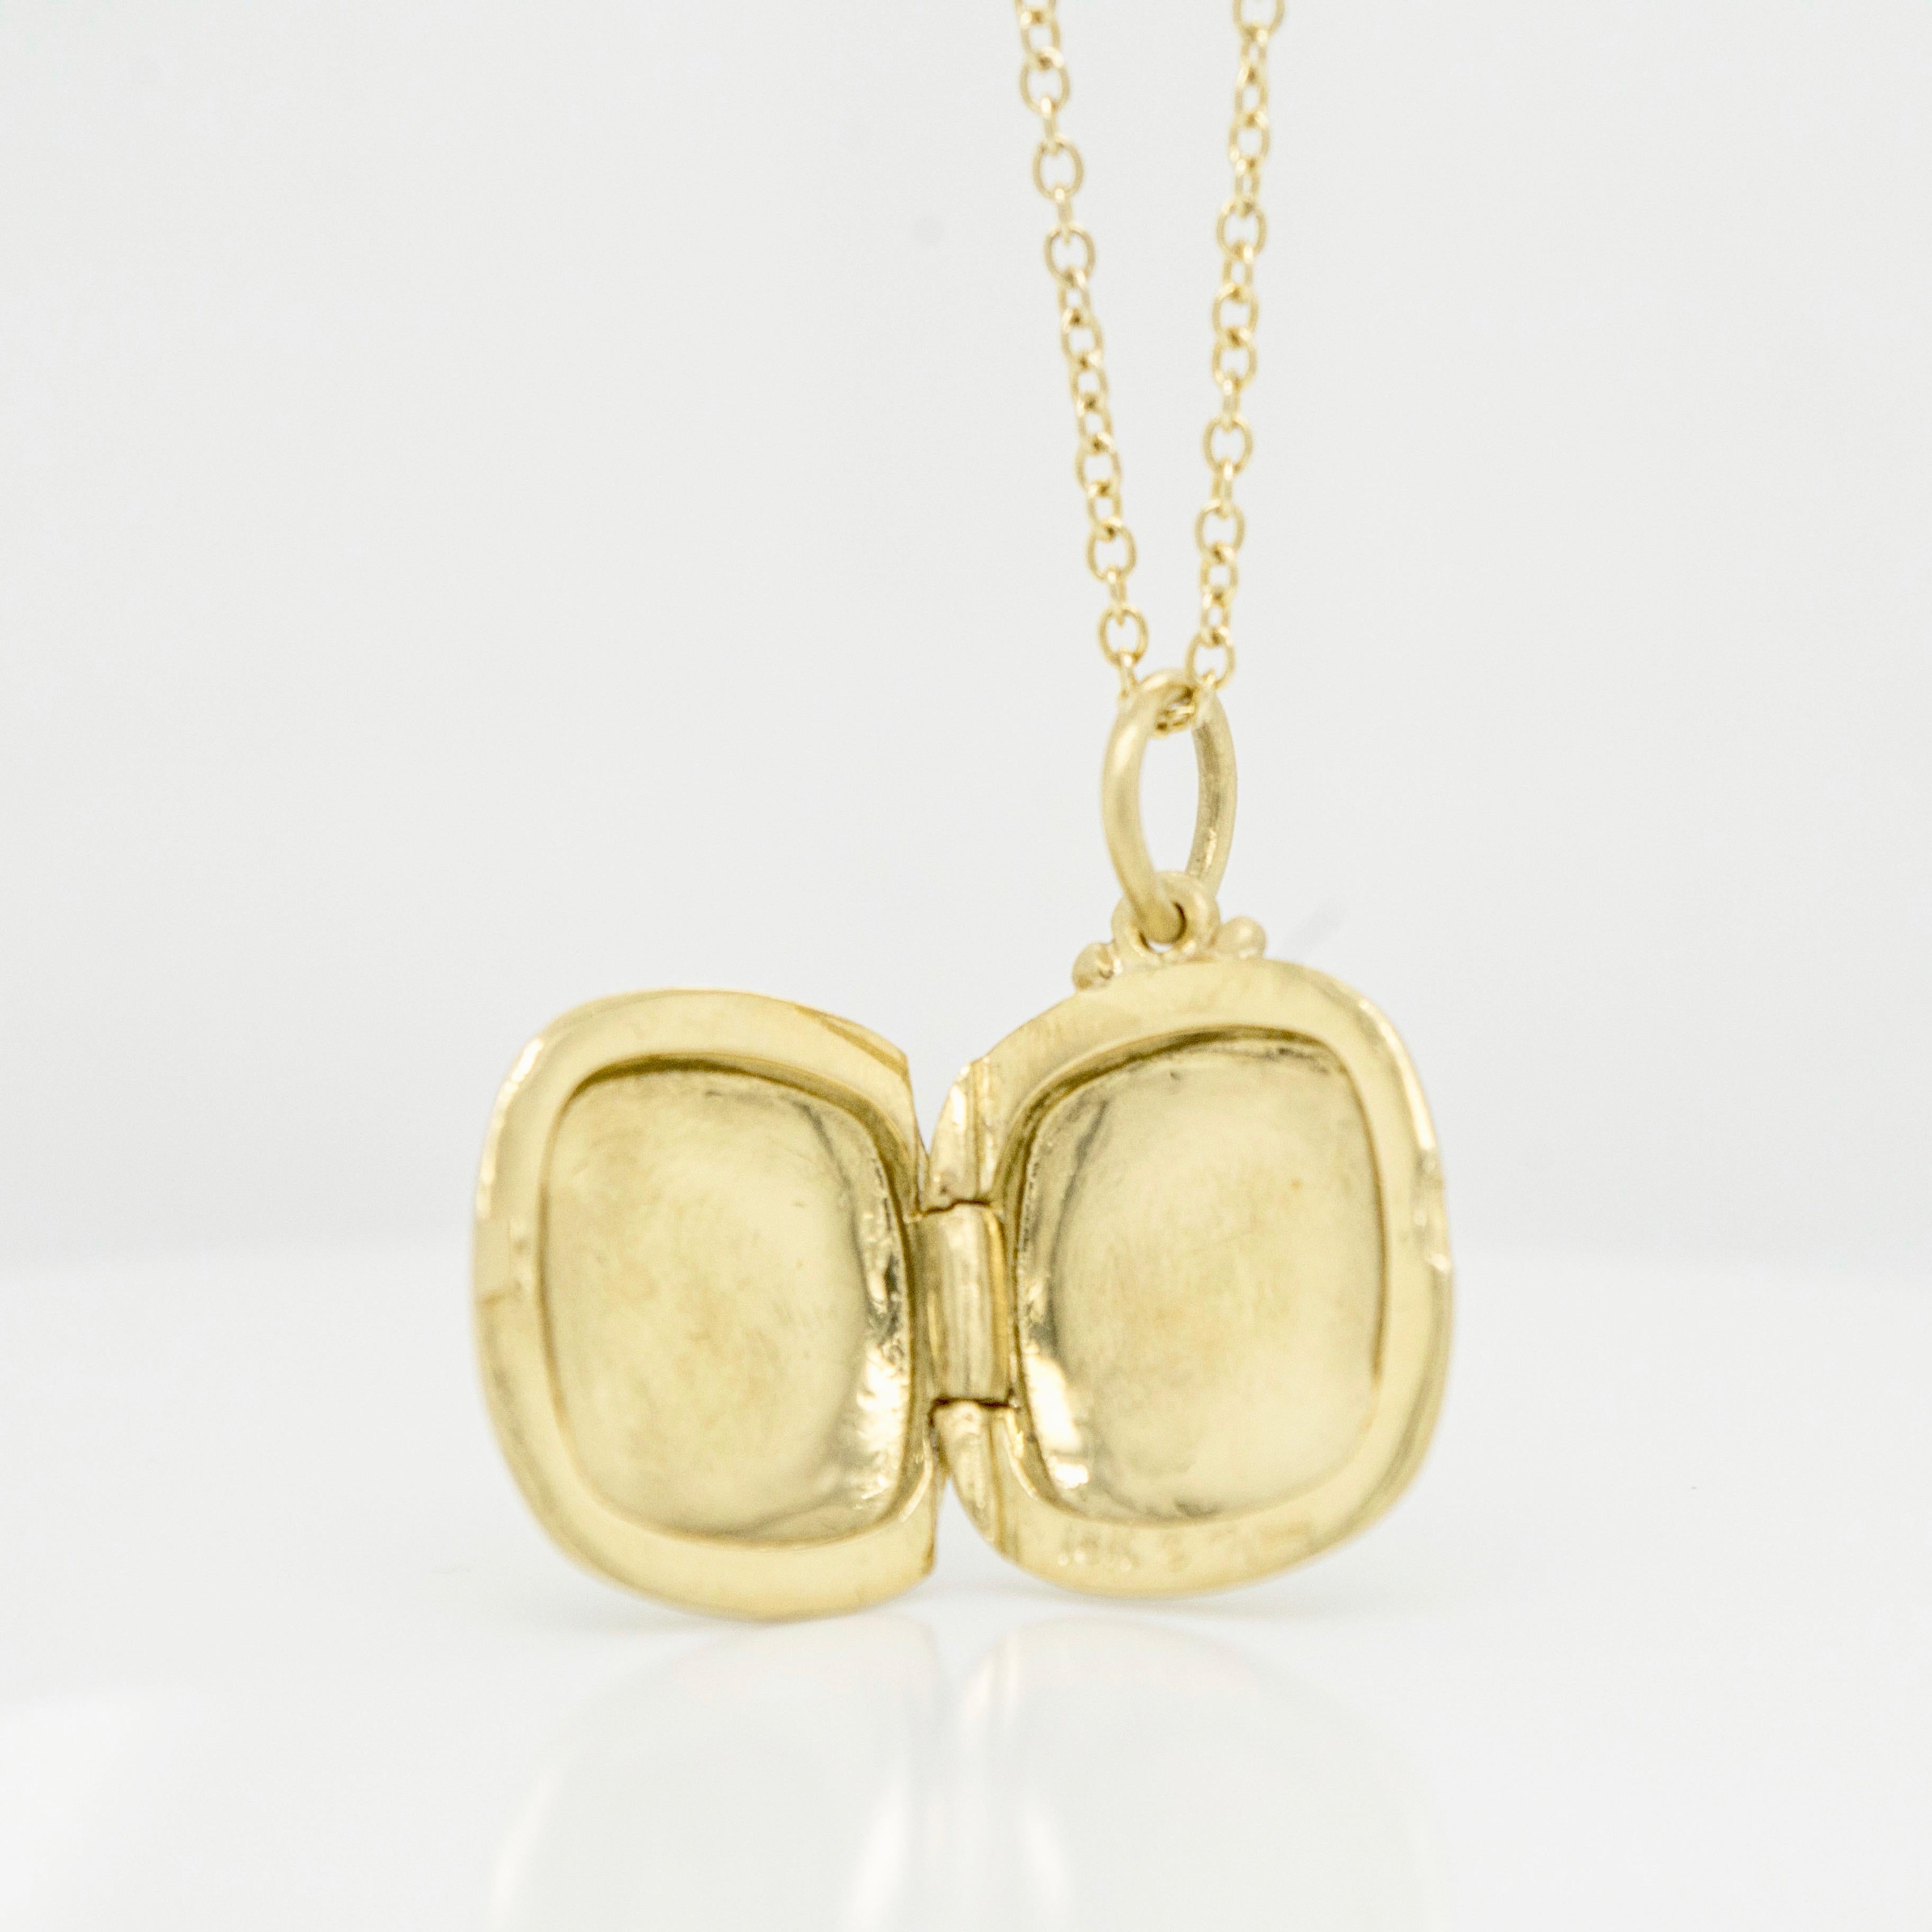 Faye Kim's 18k gold cushion-shaped locket with substance and style. Finely handcrafted and matte-finished. Personalize it with an engraving or with gemstones, and wear it alone or layered with other necklaces. 

Locket .79